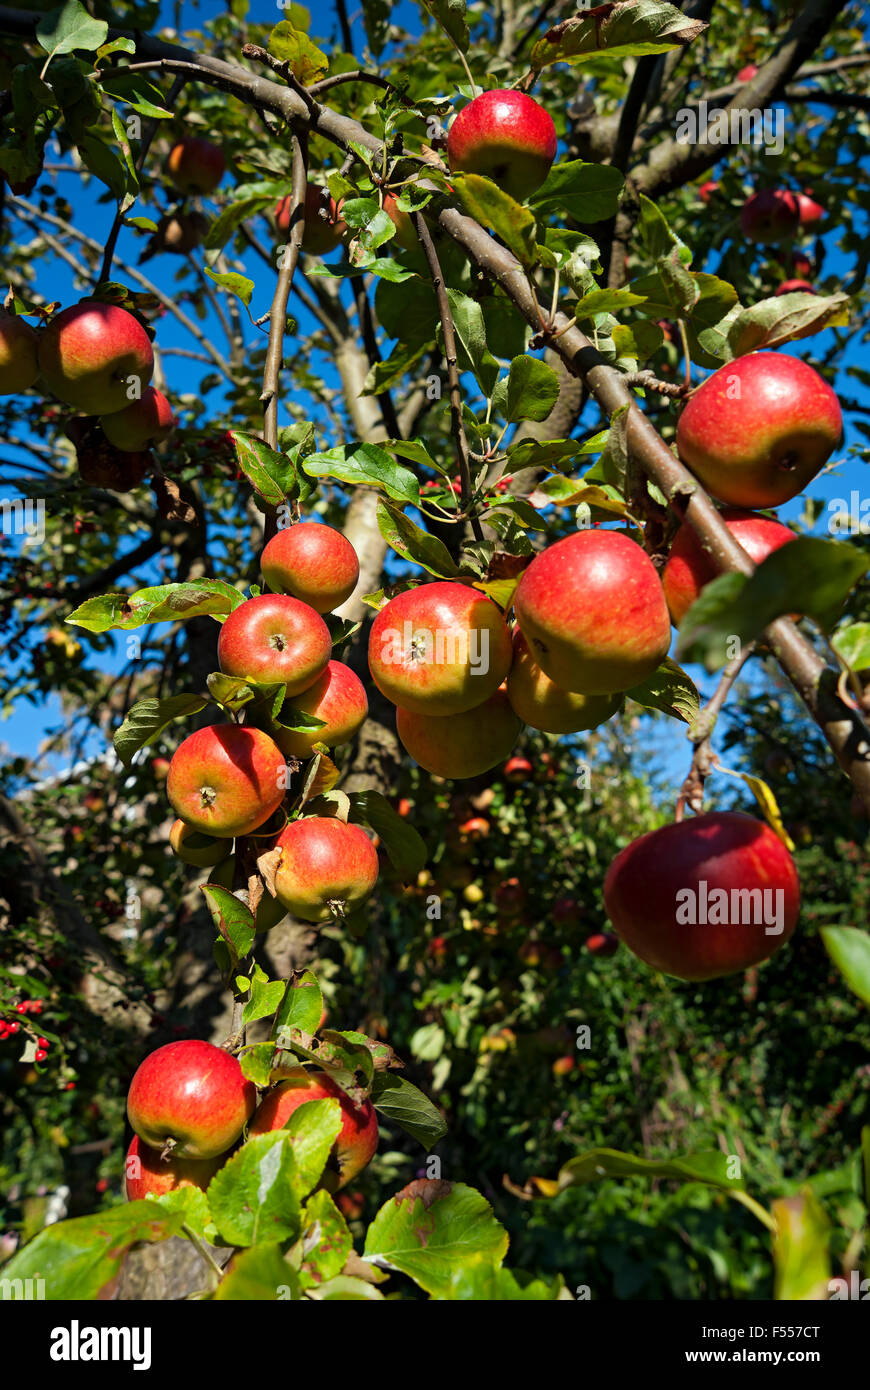 Close up of red ripe Charles Ross apples growing on tree apple branch fruit fruits in summer autumn England UK United Kingdom GB Great Britain Stock Photo